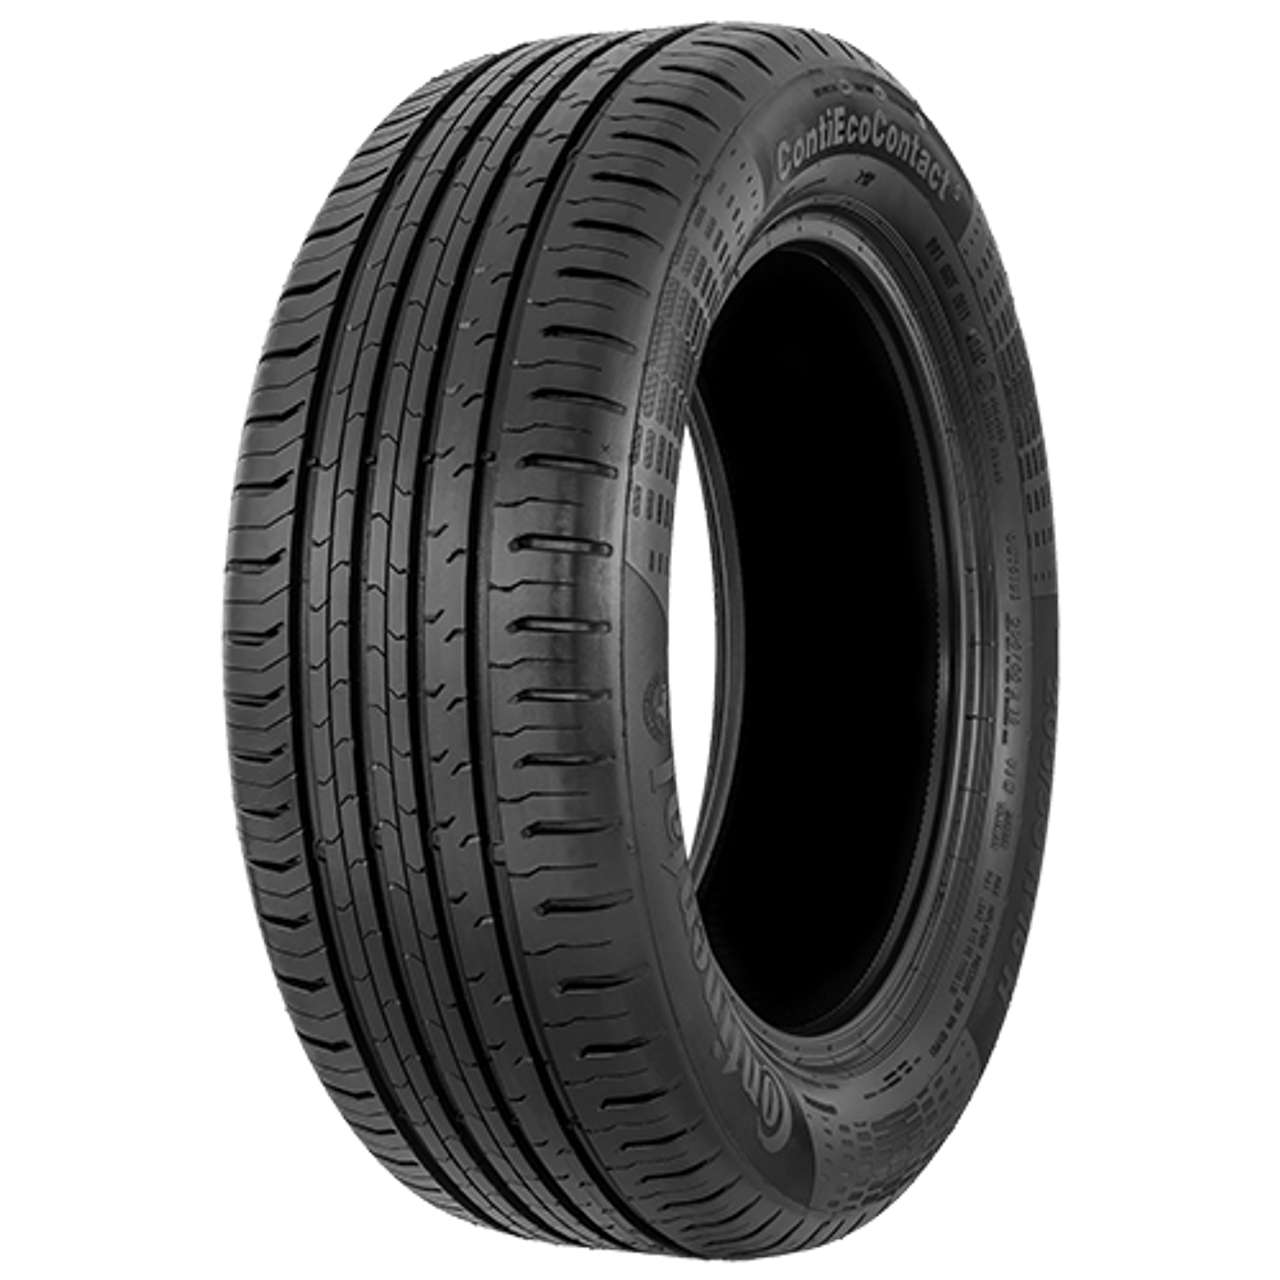 CONTINENTAL CONTIECOCONTACT 5 215/60R17 96H 